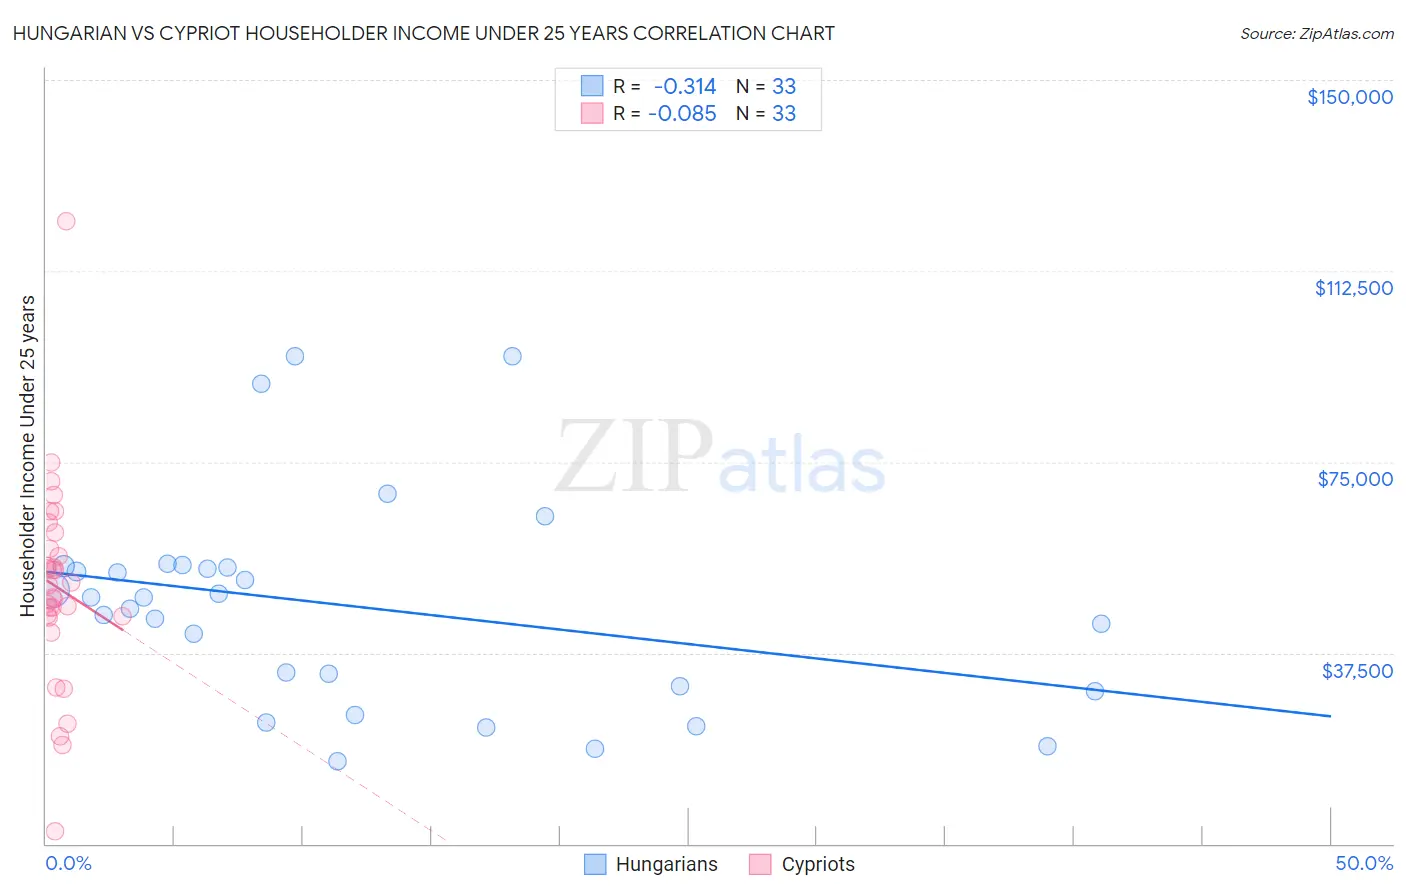 Hungarian vs Cypriot Householder Income Under 25 years